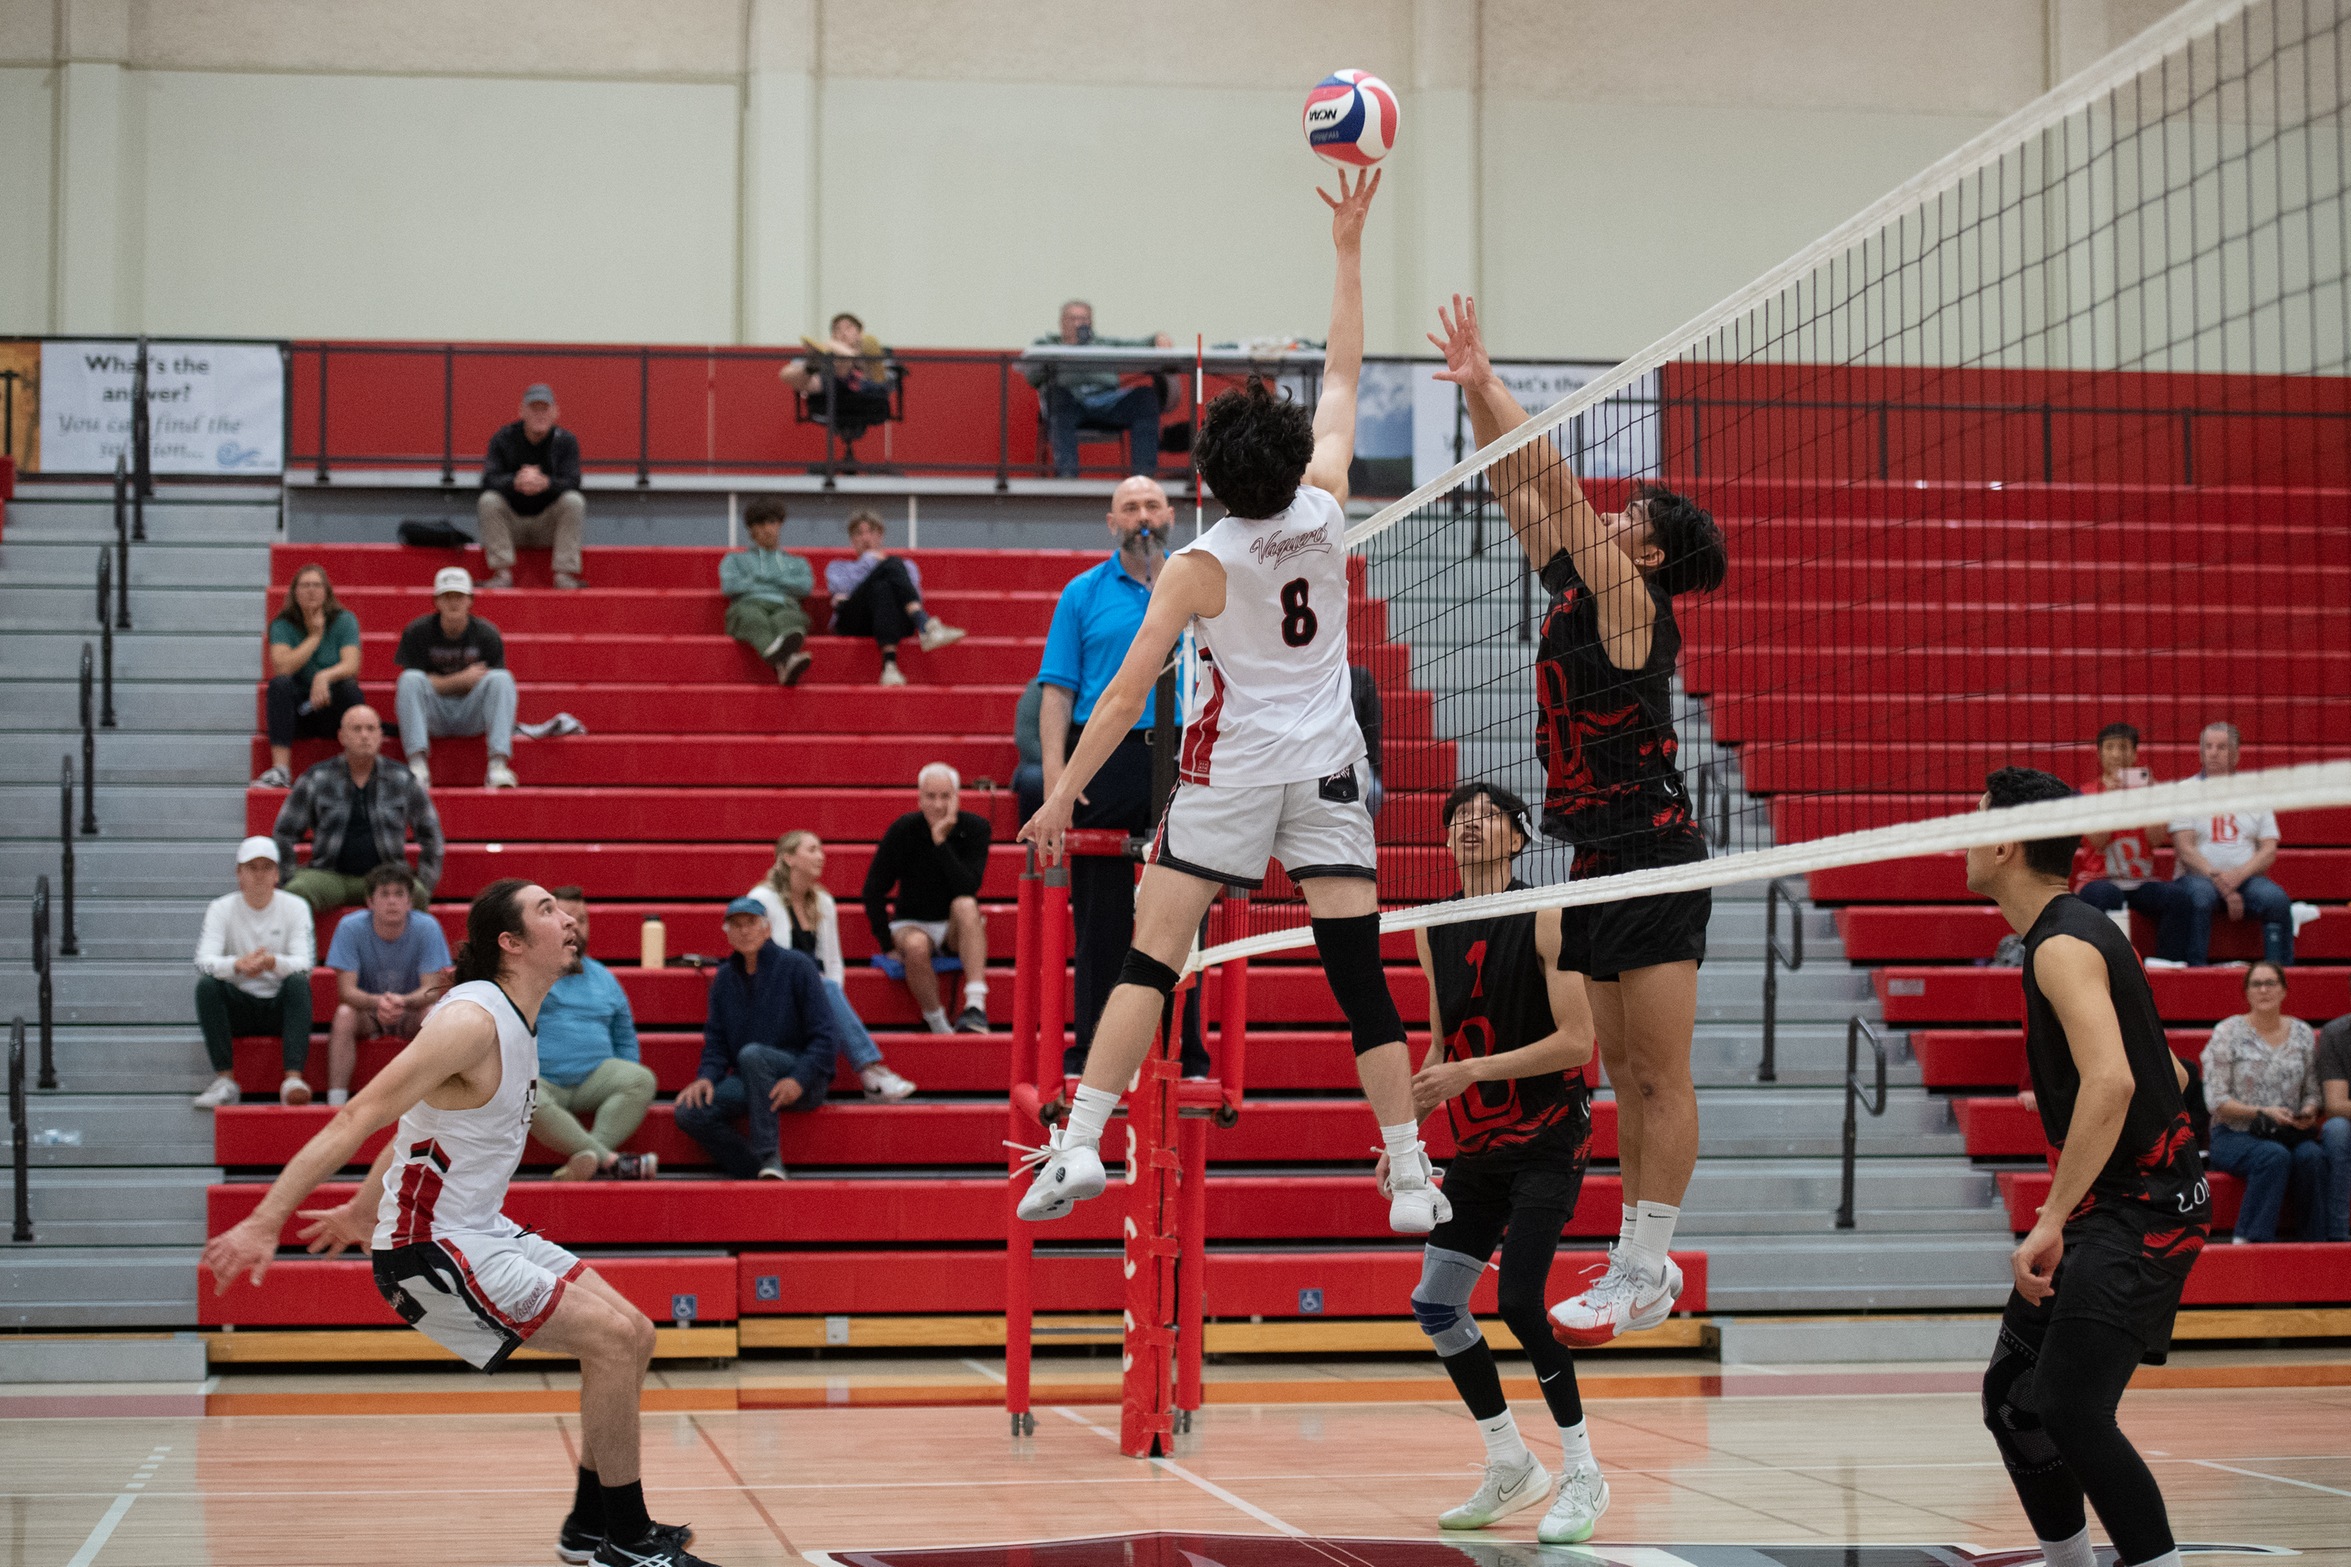 Vaqueros Nearly Upset Undefeated Long Beach, Fall in 5 Sets